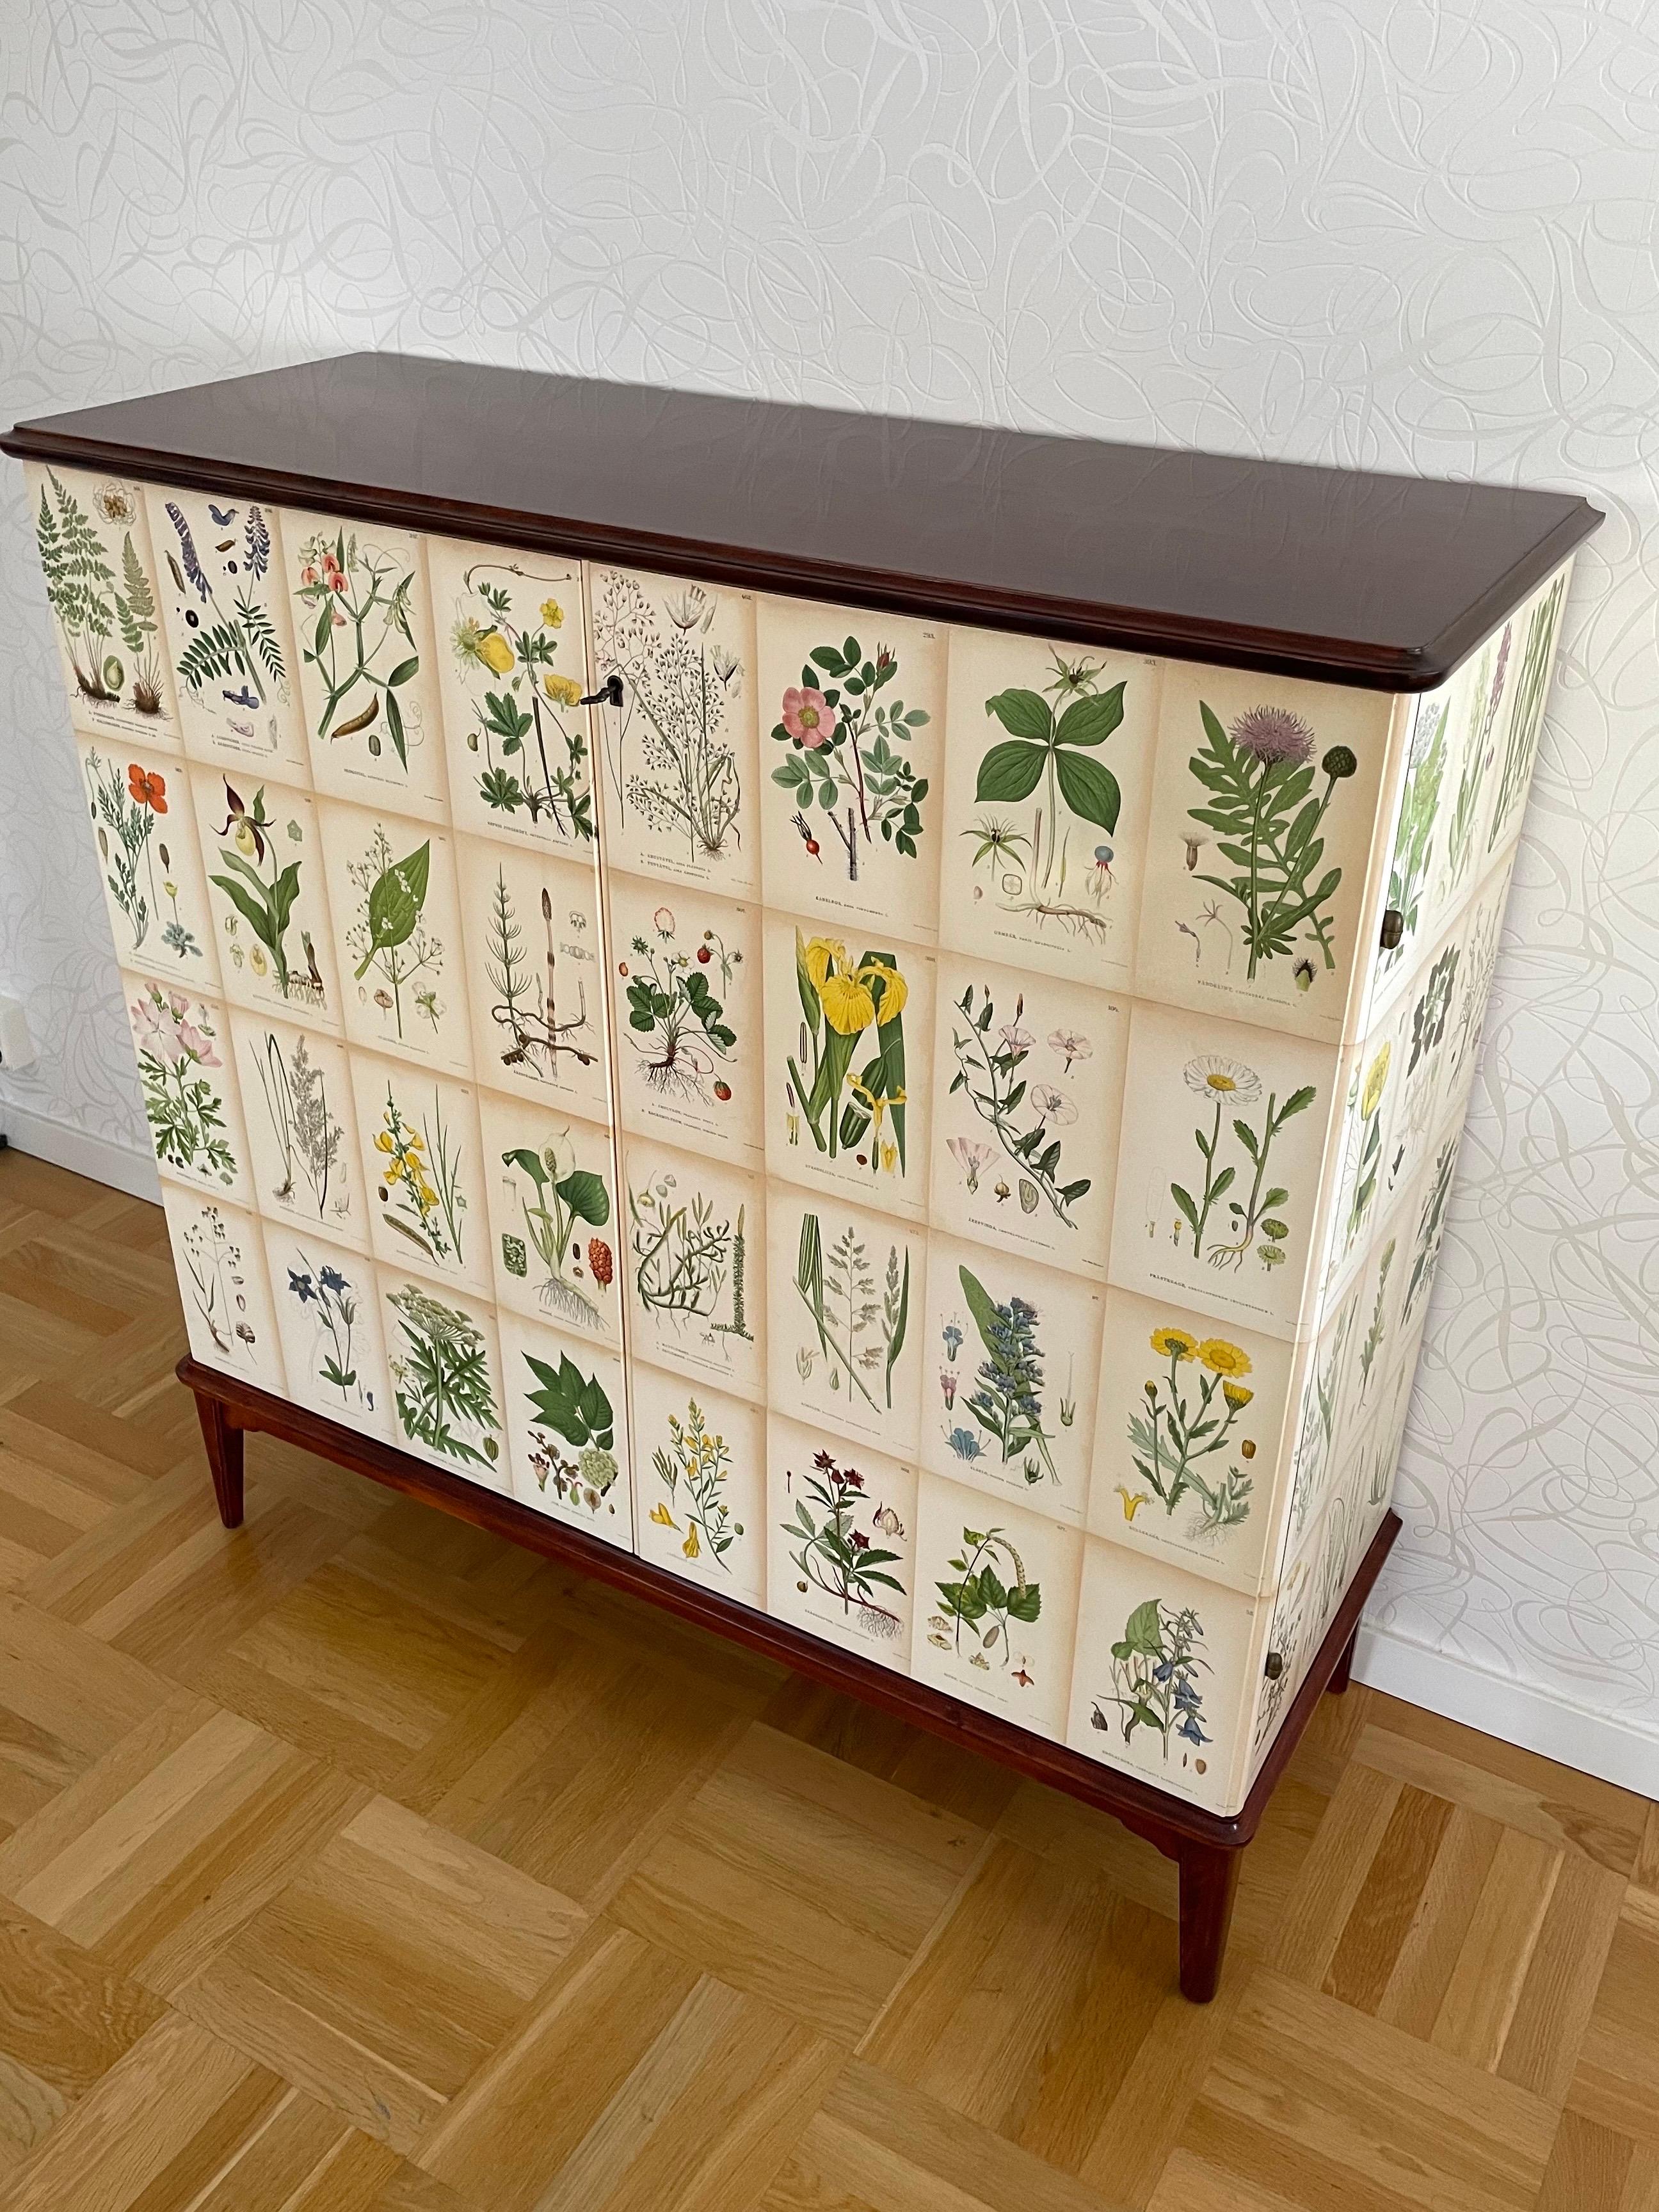 Hand-Crafted Swedish Modern 1950s Mahogny Cabinet with Nordens Flora (Nordic Flowers) Decor 
 For Sale